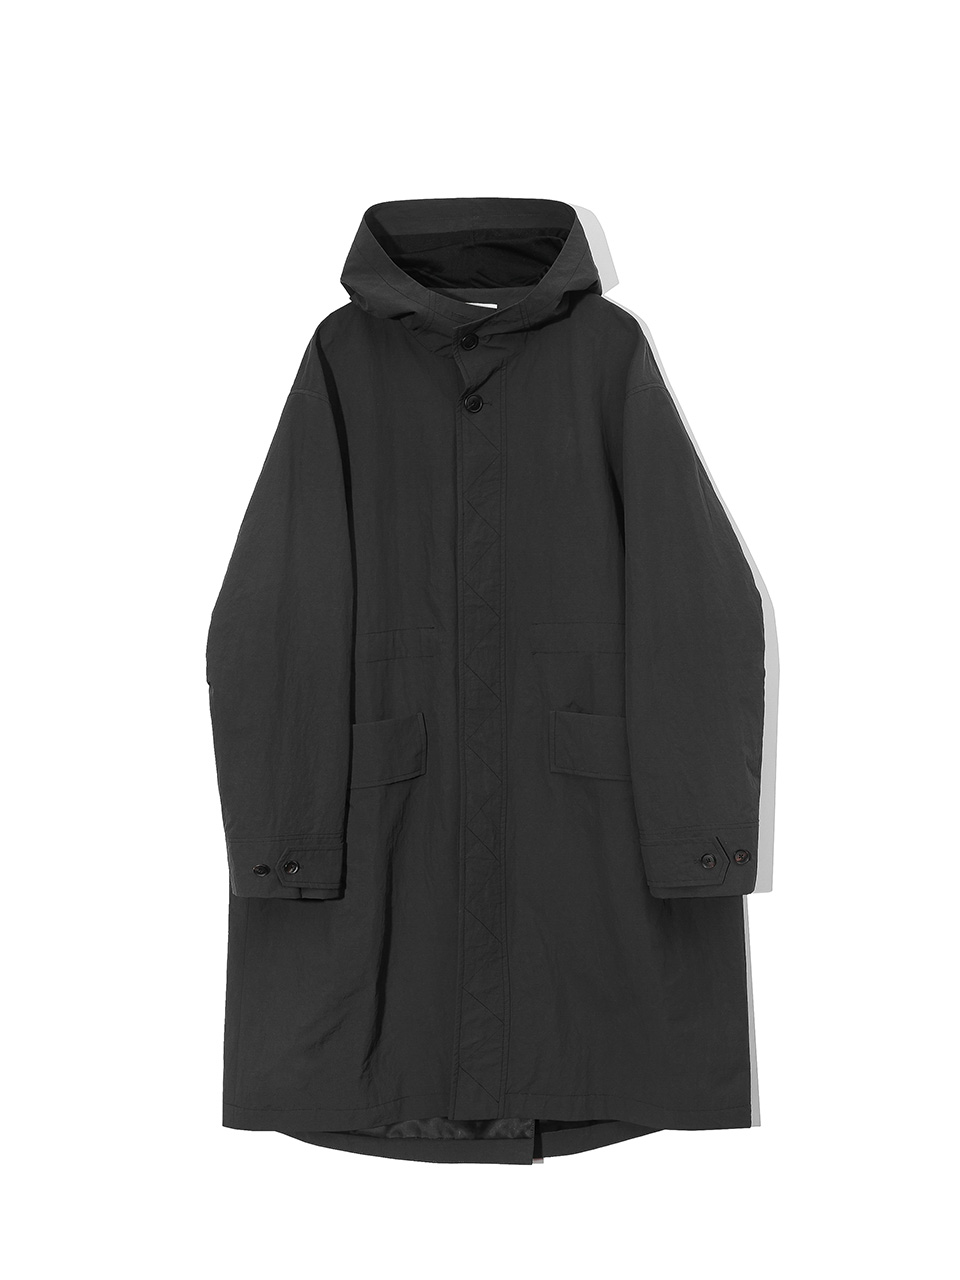 [Ourselves] EXPLORER HOODED COAT (Charcoal)